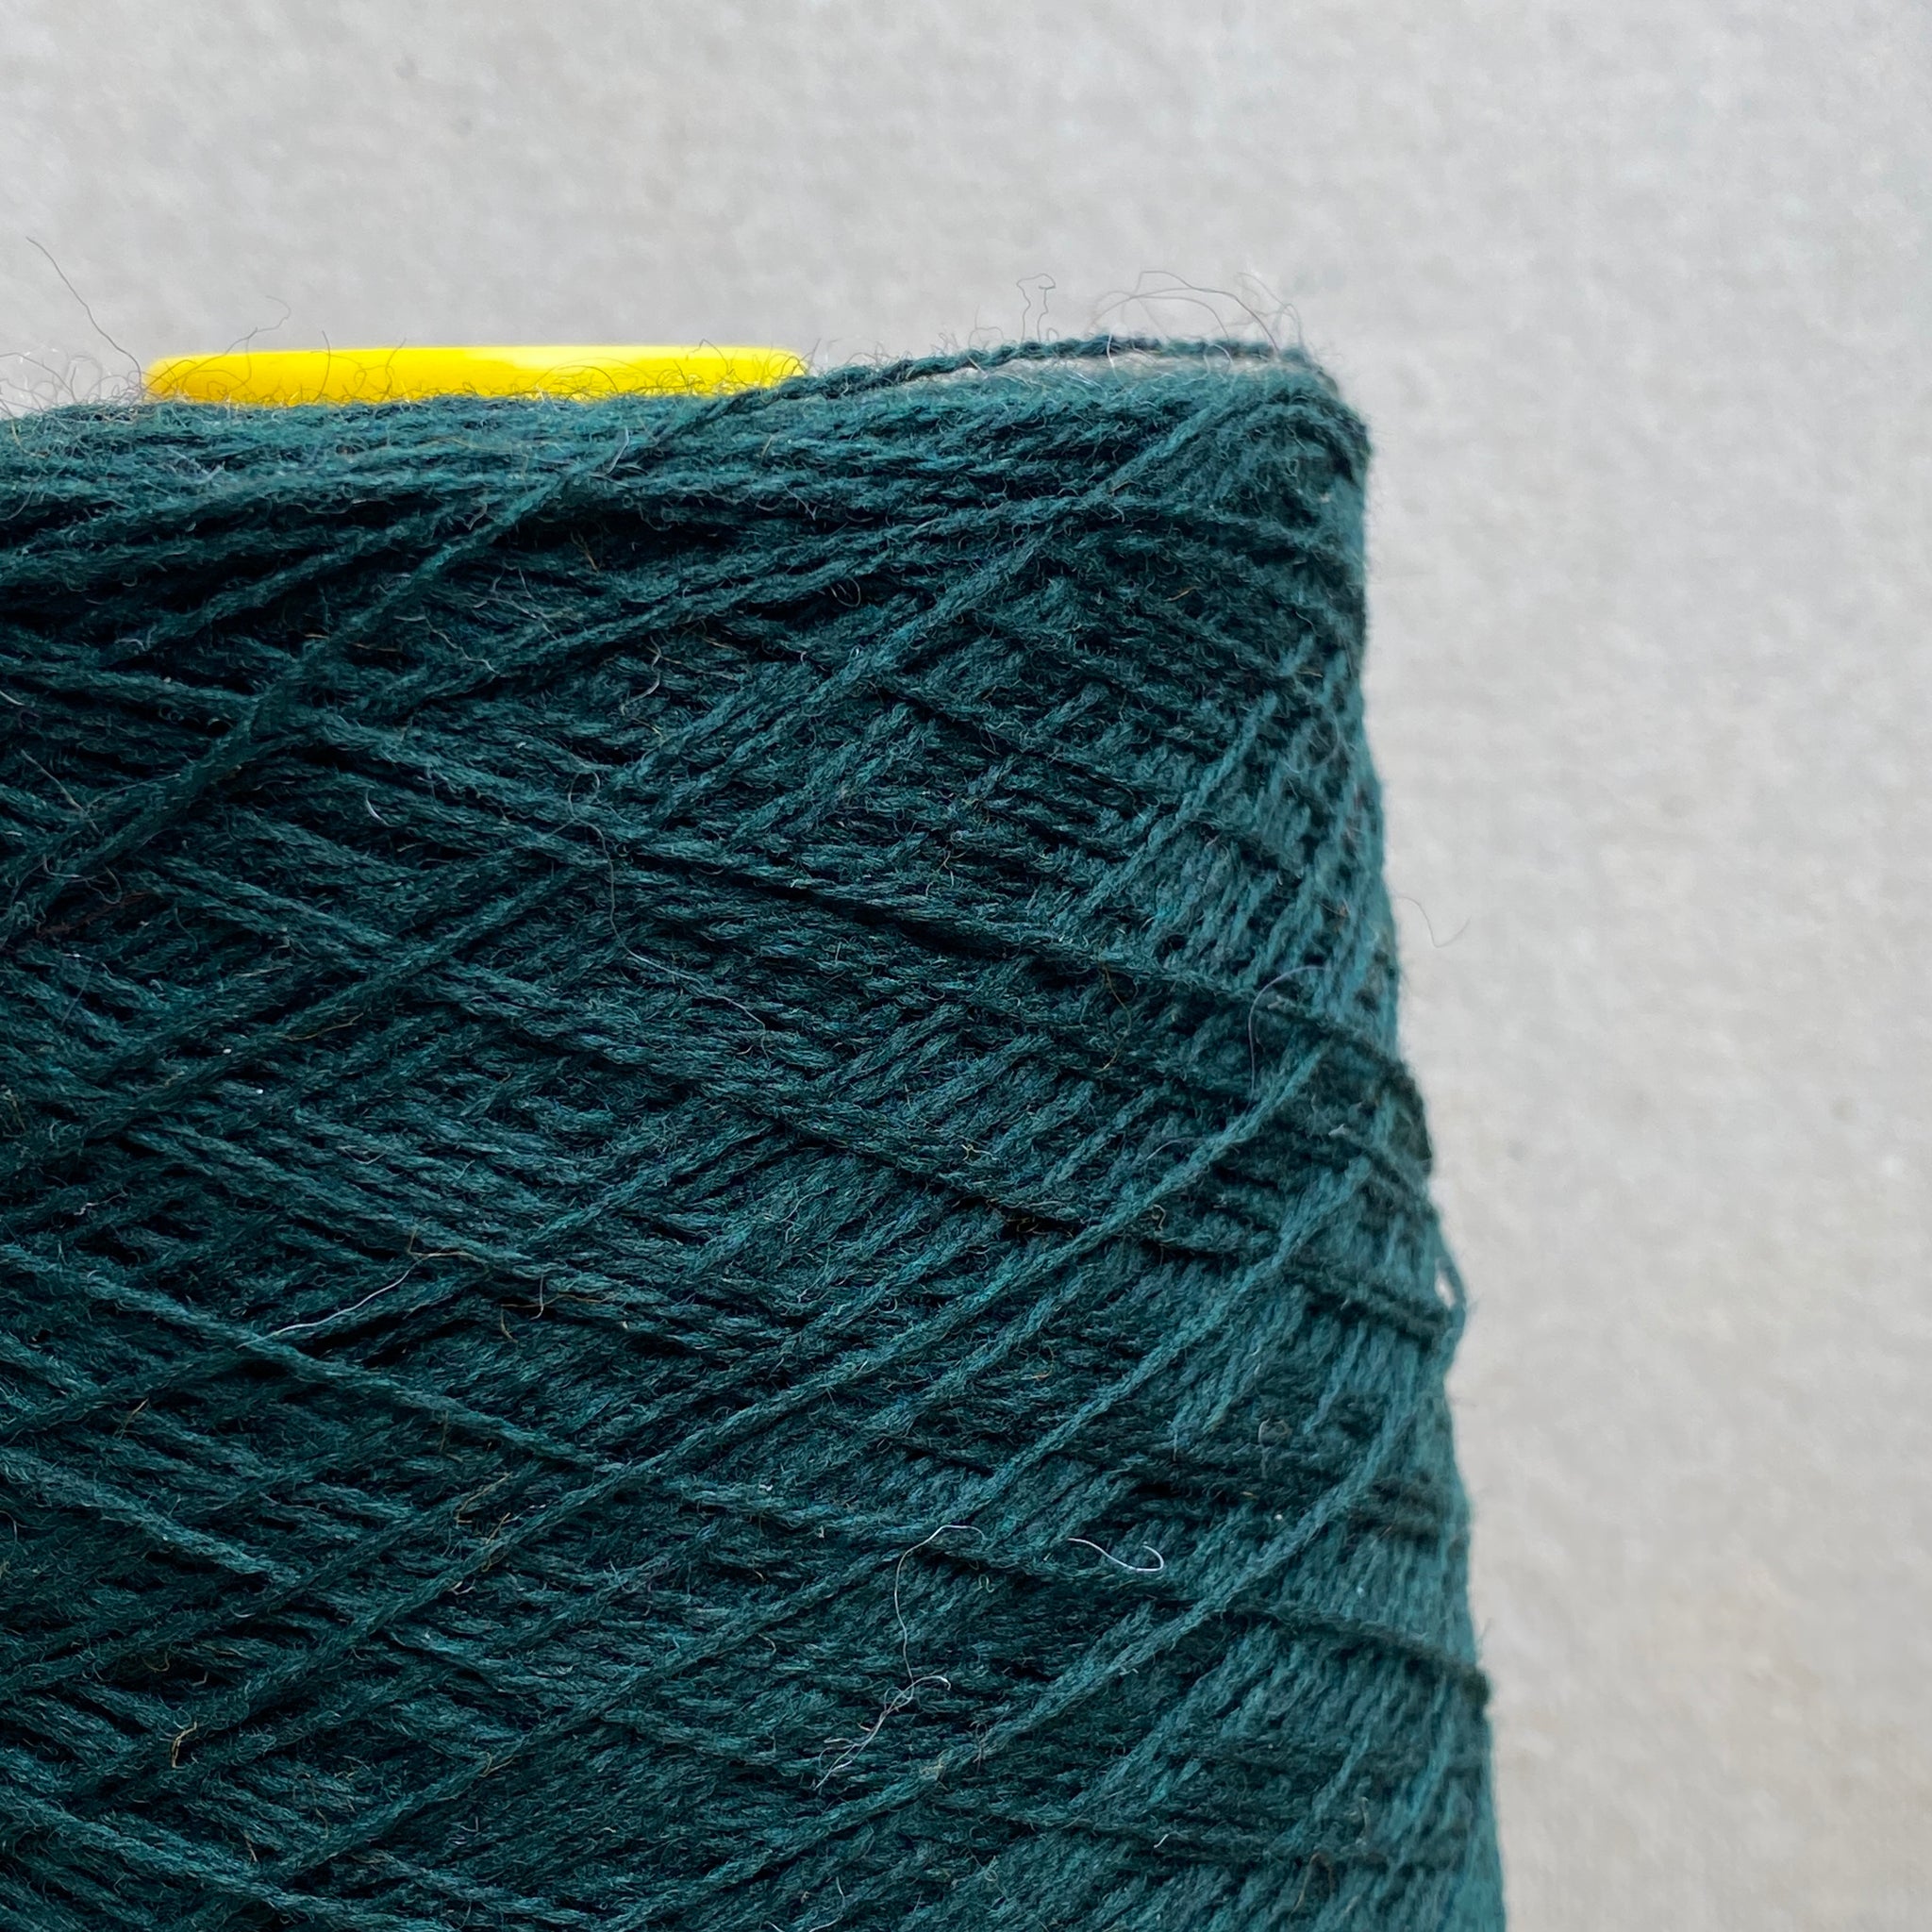 2 Ply Lambswool - Forest Weed